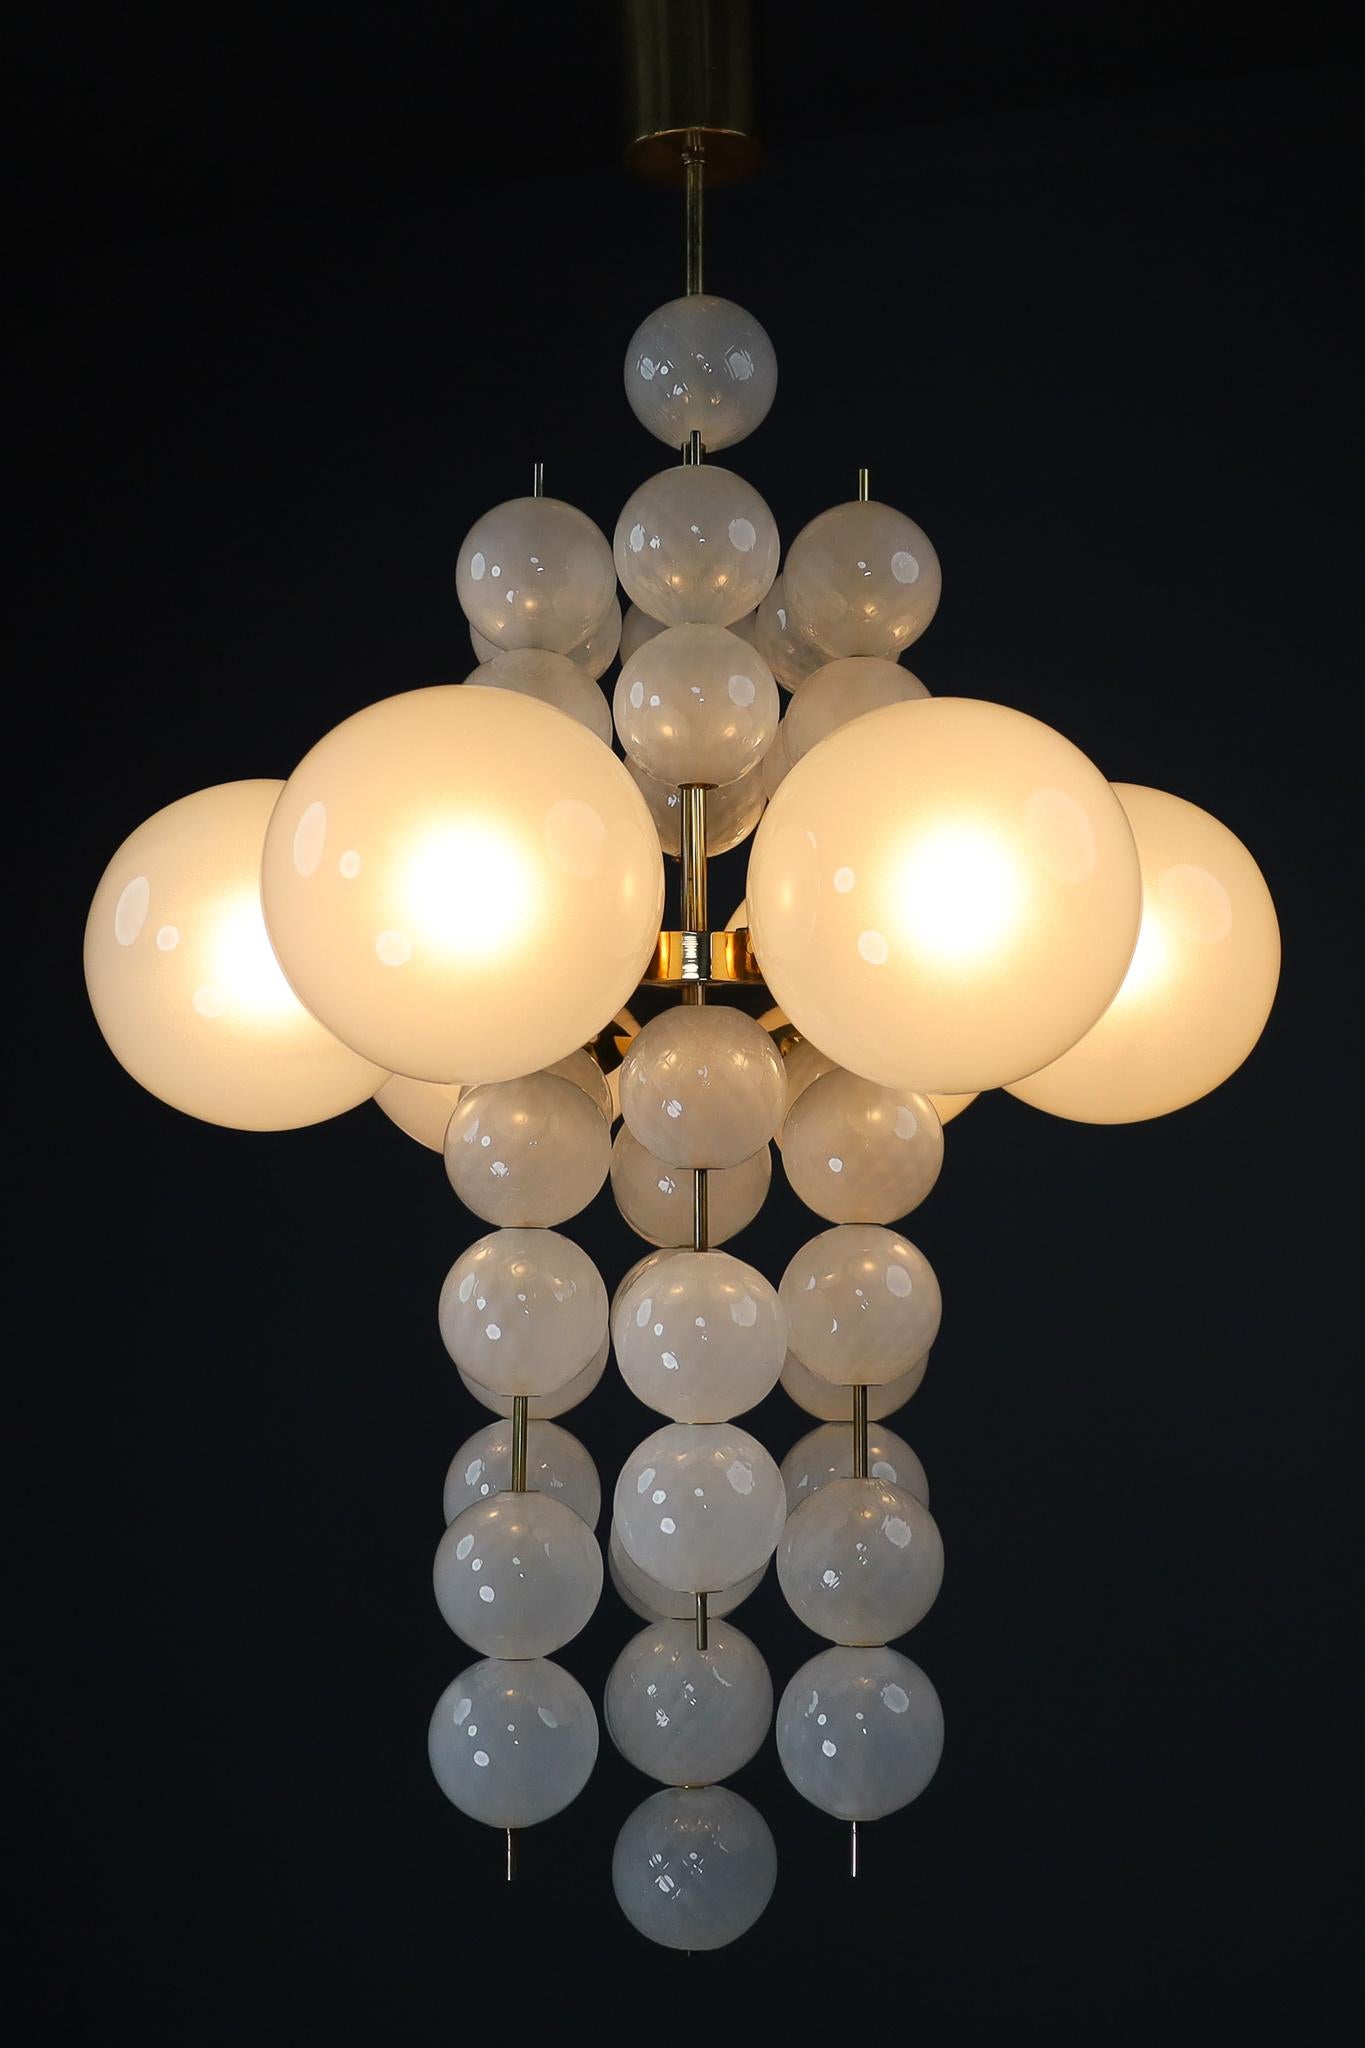 Set of 3 XL Hotel Chandeliers with Brass Fixture and Hand-Blowed Glass Globes 6